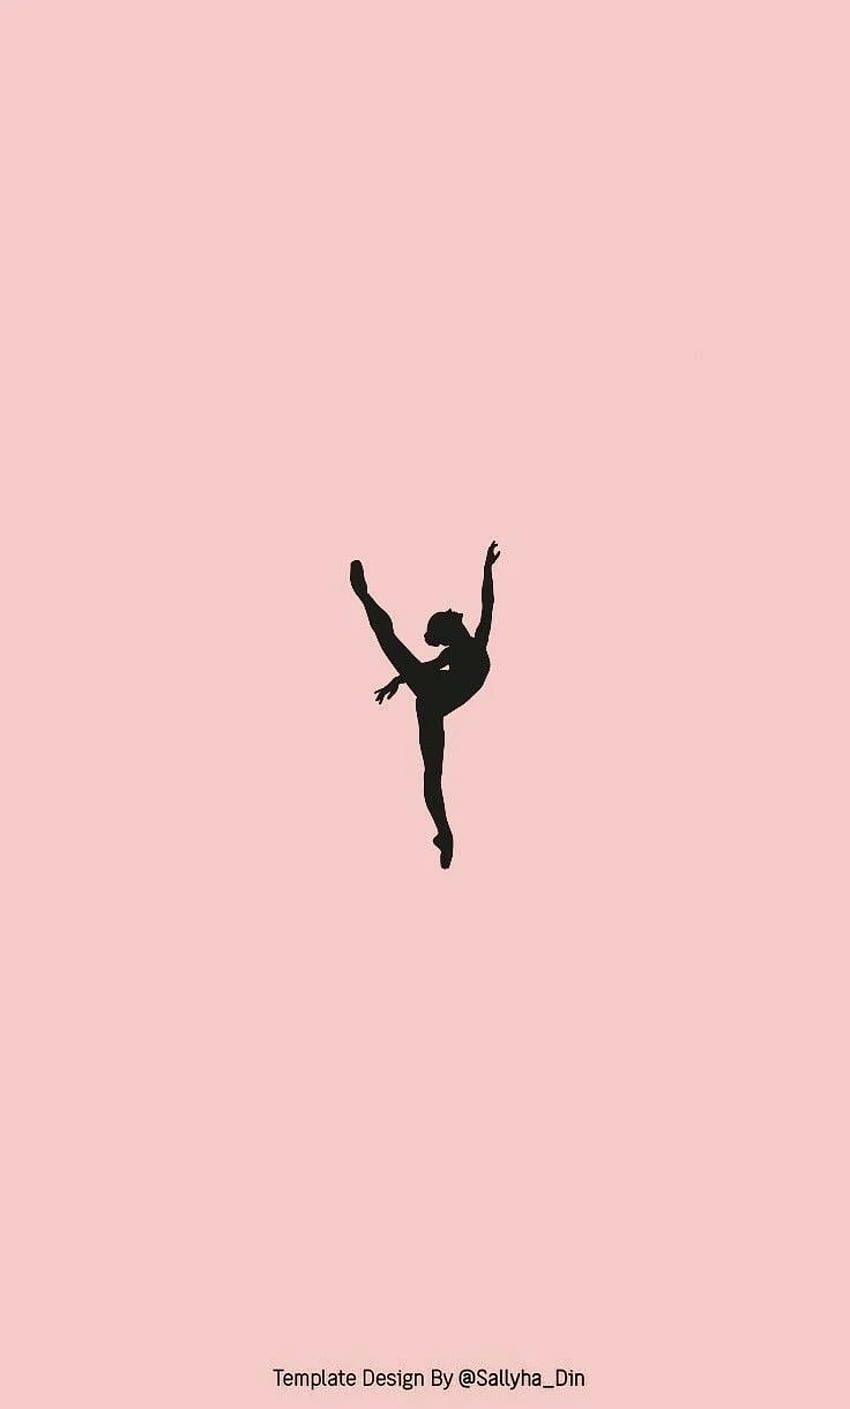 A silhouette of a ballerina in a pink background - Gymnastics